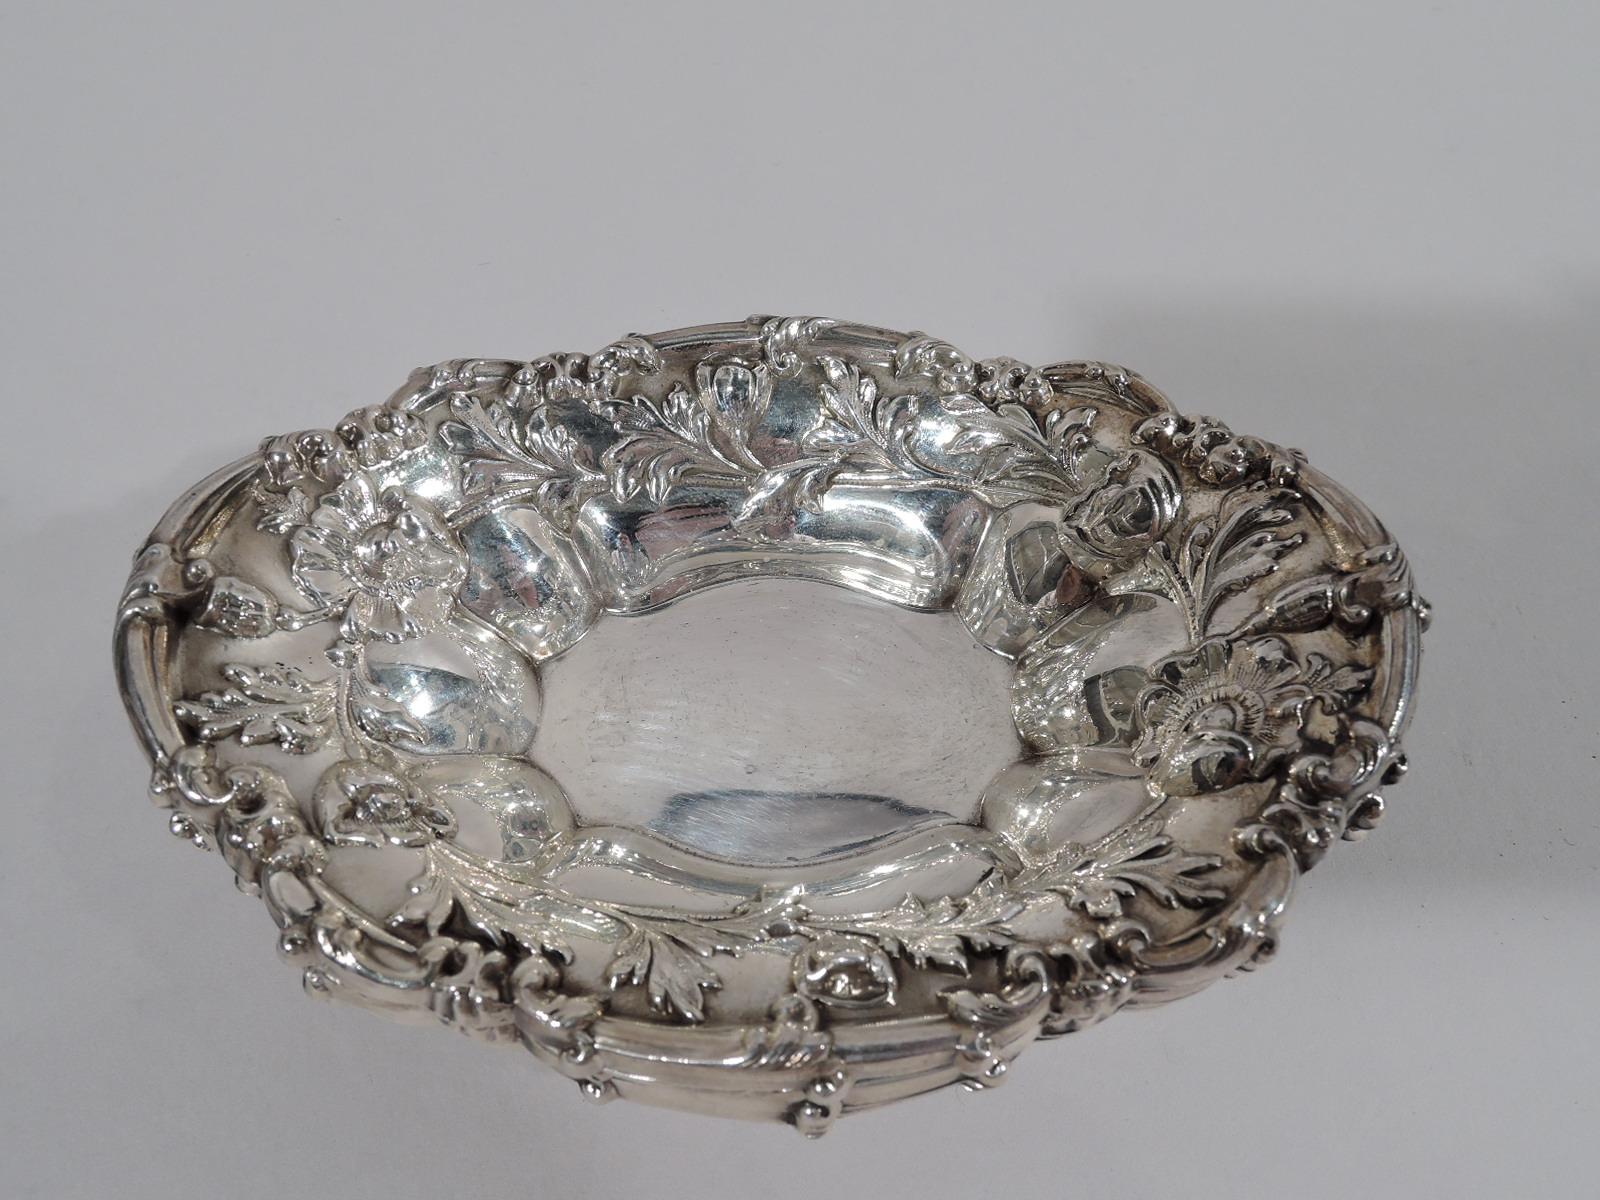 Set of 4 turn-of-the-century Art Nouveau sterling silver nut dishes. Made by Meriden Britannia (part of International) in Connecticut. Each: Boat-form with shaped oval well. Sides lobed with chased strewn flowers and scrolled rim. Fully marked and